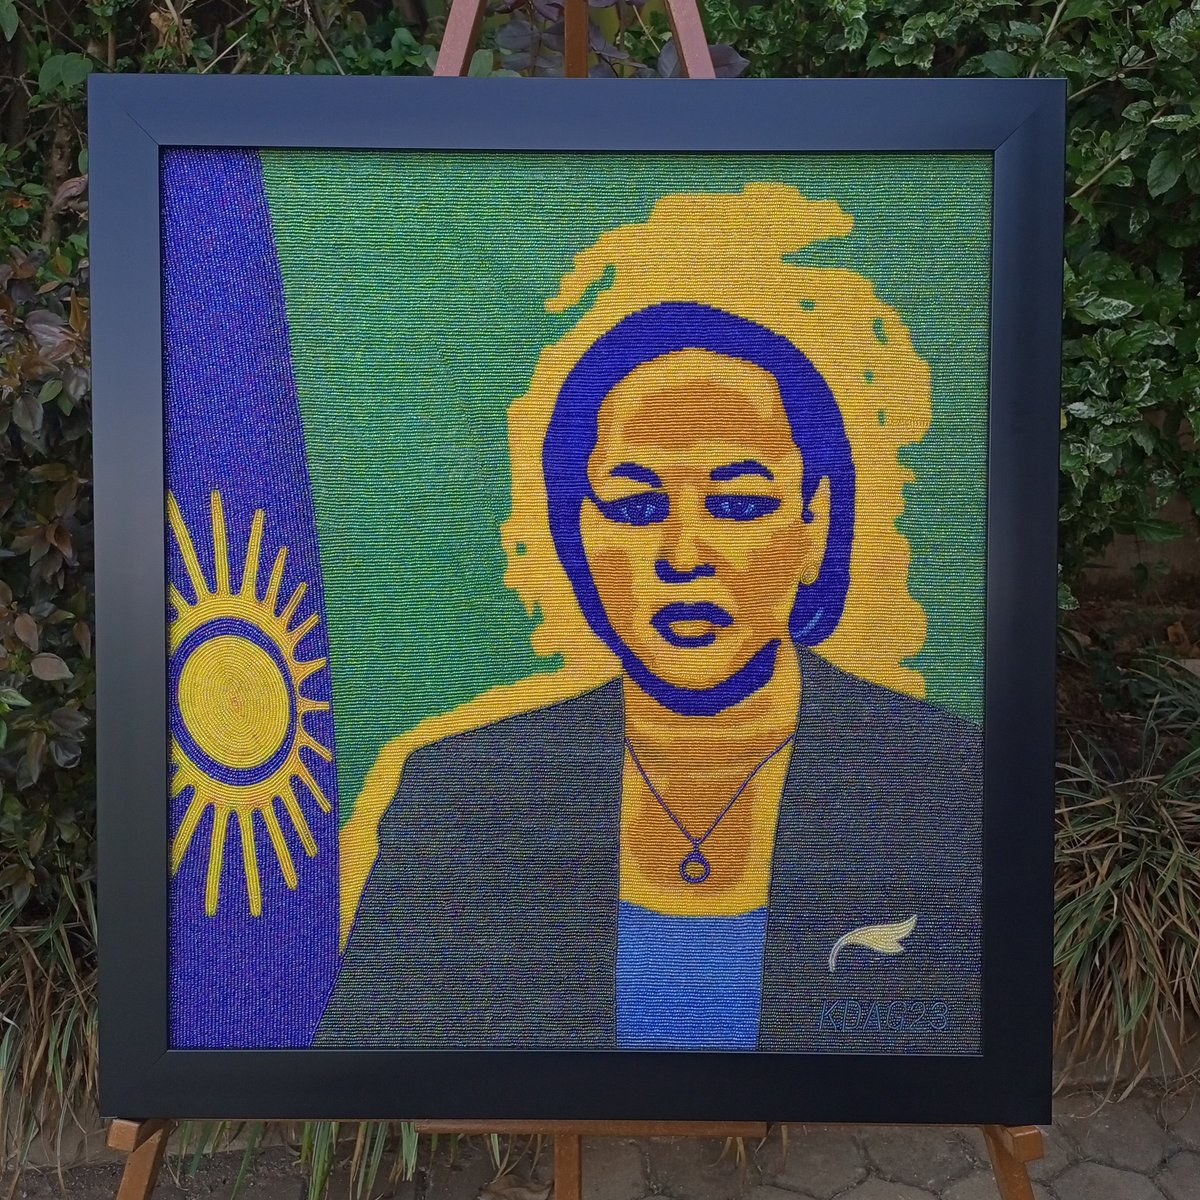 Hon Ambassador Mbabazi Rosemary. Here is the portrait of you made by Deaf youth Artists of Rwanda during the celebration of International Deaf Awareness Month as part of fundraising way to support their ongoing artistic work. Your support will highly appreciate @RMbabazi #bead